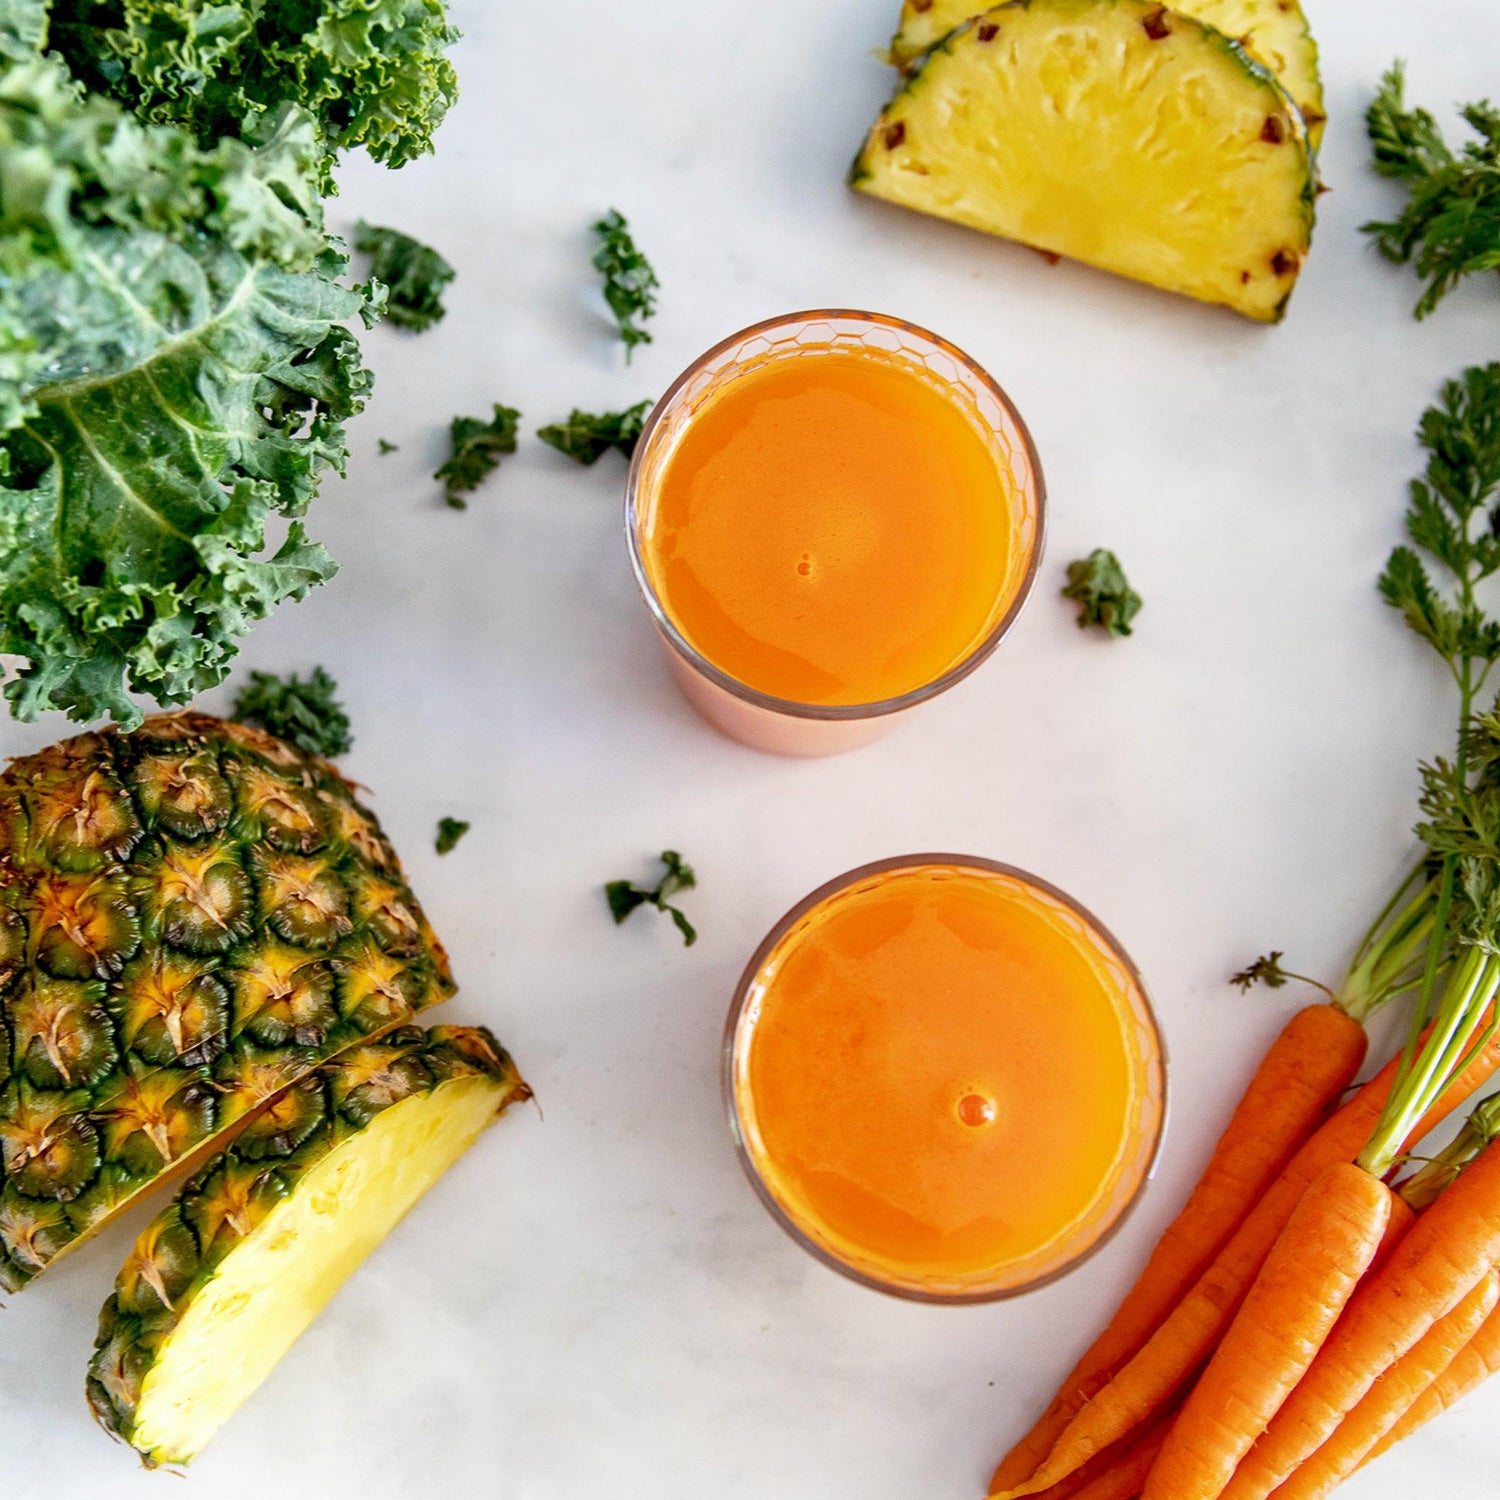 Buying Juice vs. Juicing at Home: Which Saves More Money